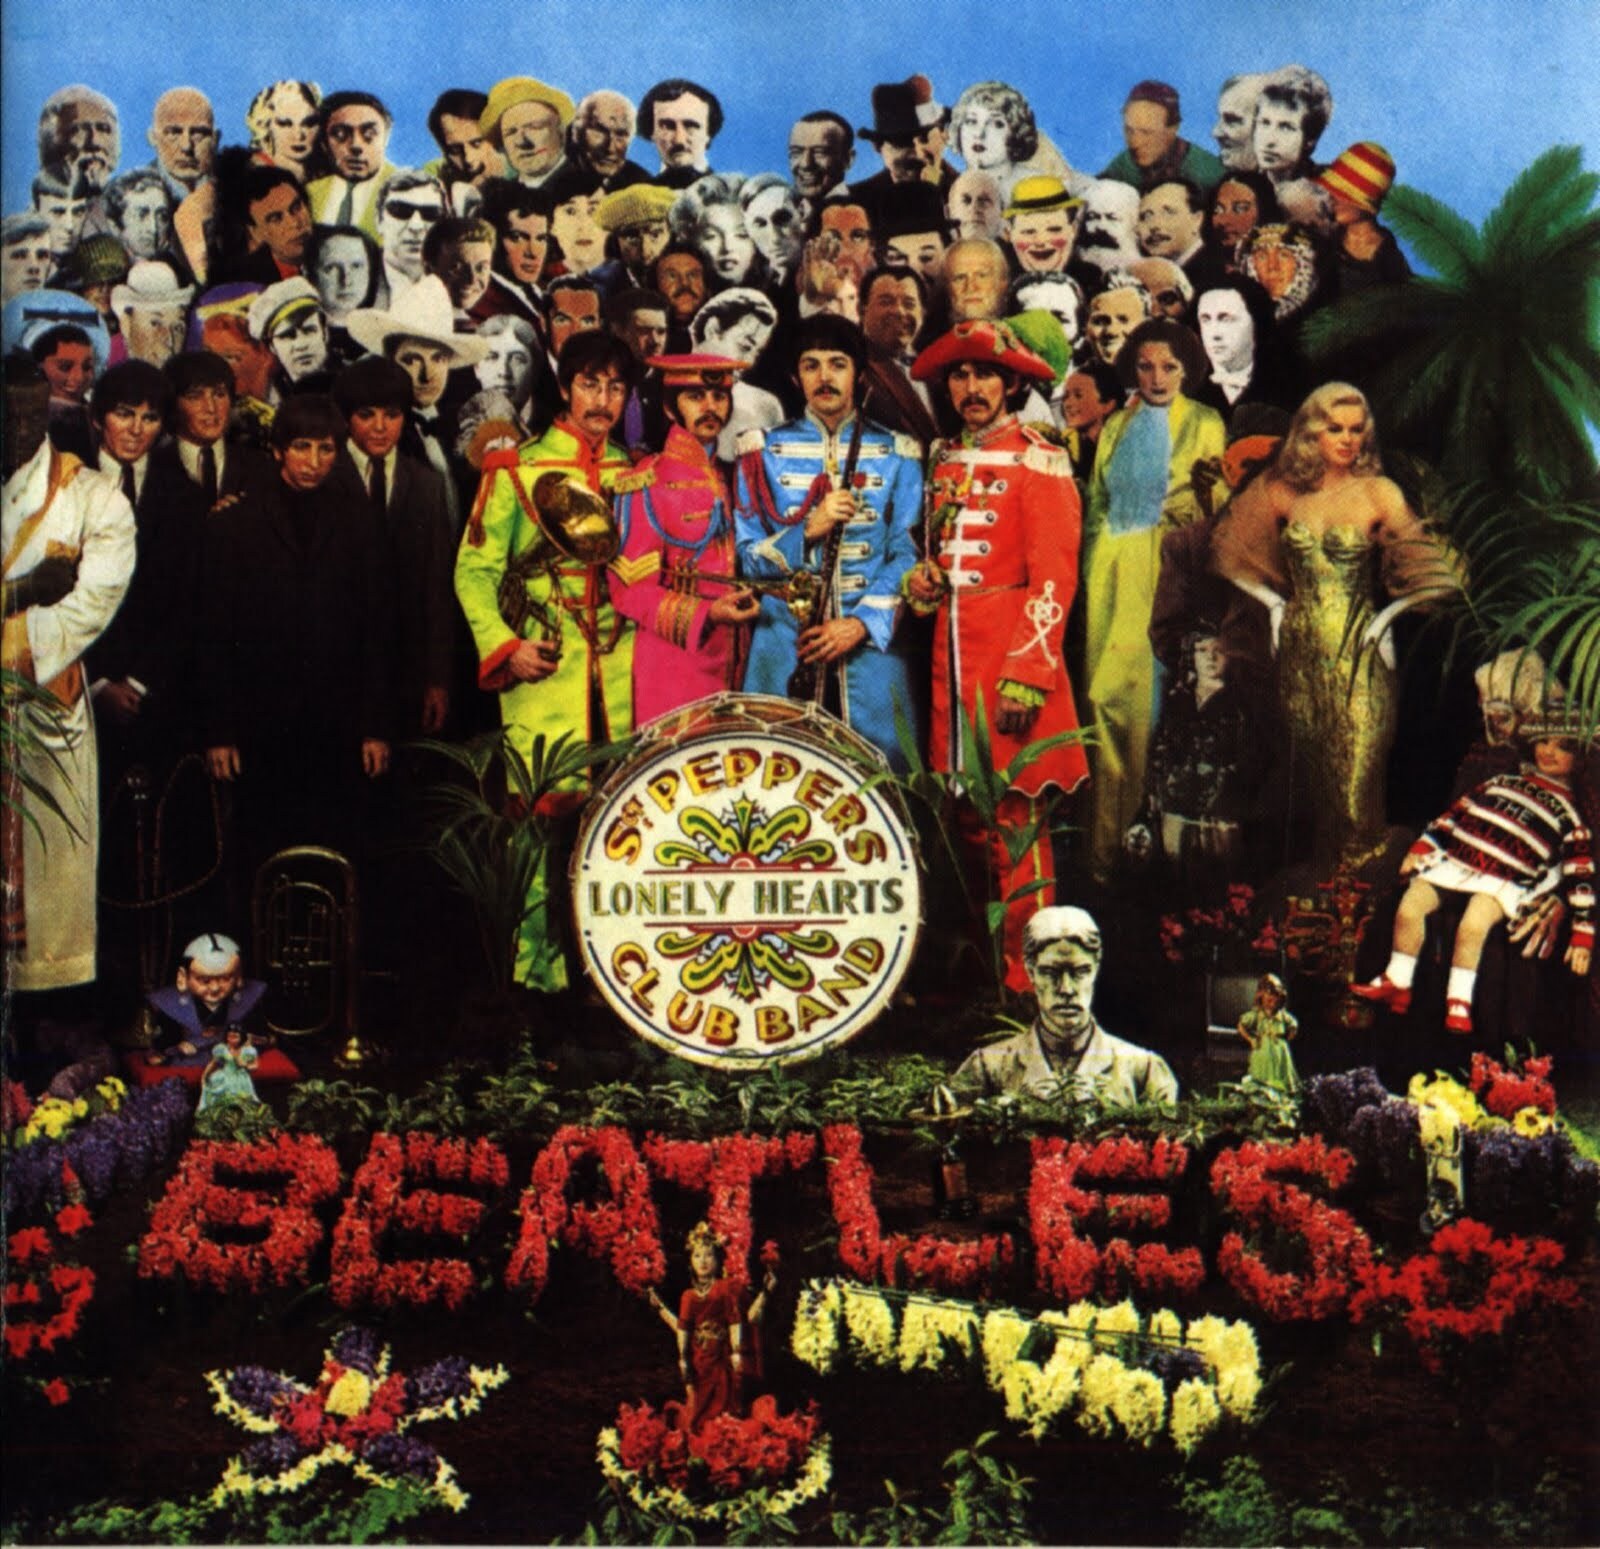 7. The Beatles 'Sgt.Pepper's Lonely Hearts Club Band - Anniversary Edition'